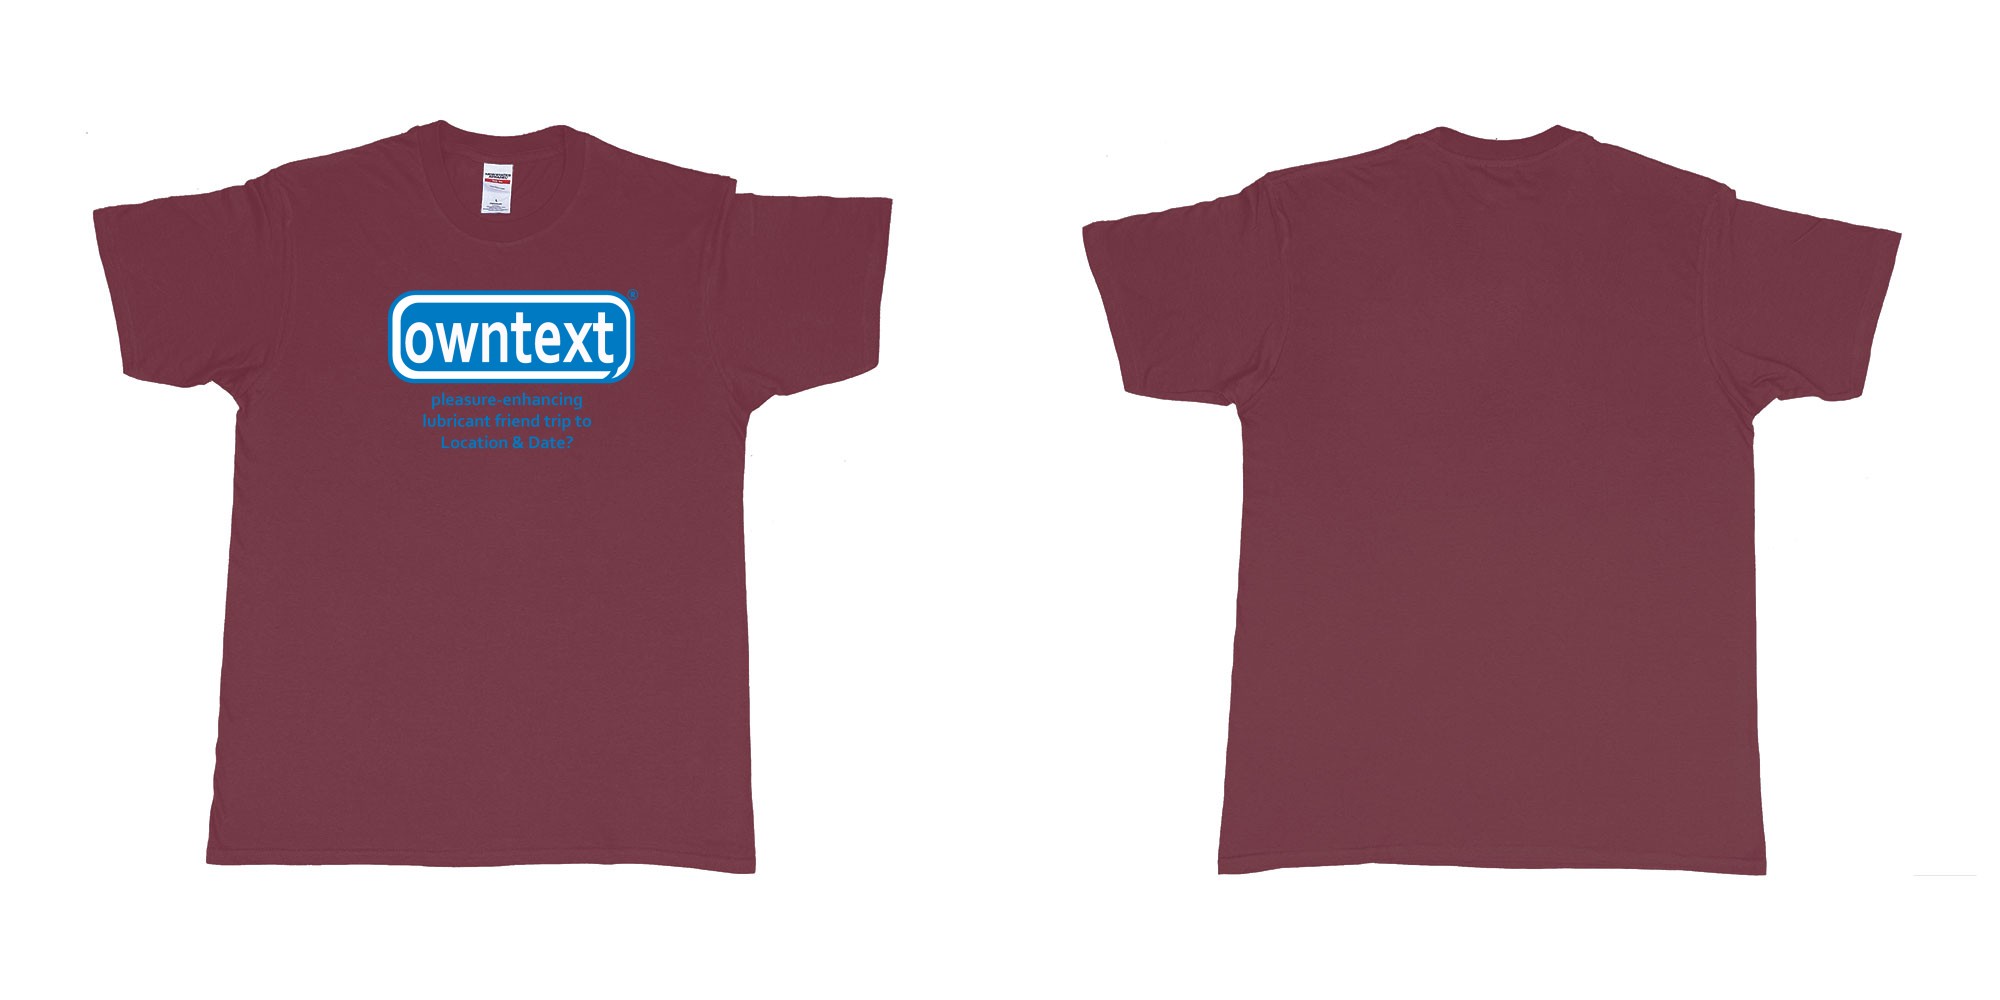 Custom tshirt design Durex in fabric color marron choice your own text made in Bali by The Pirate Way